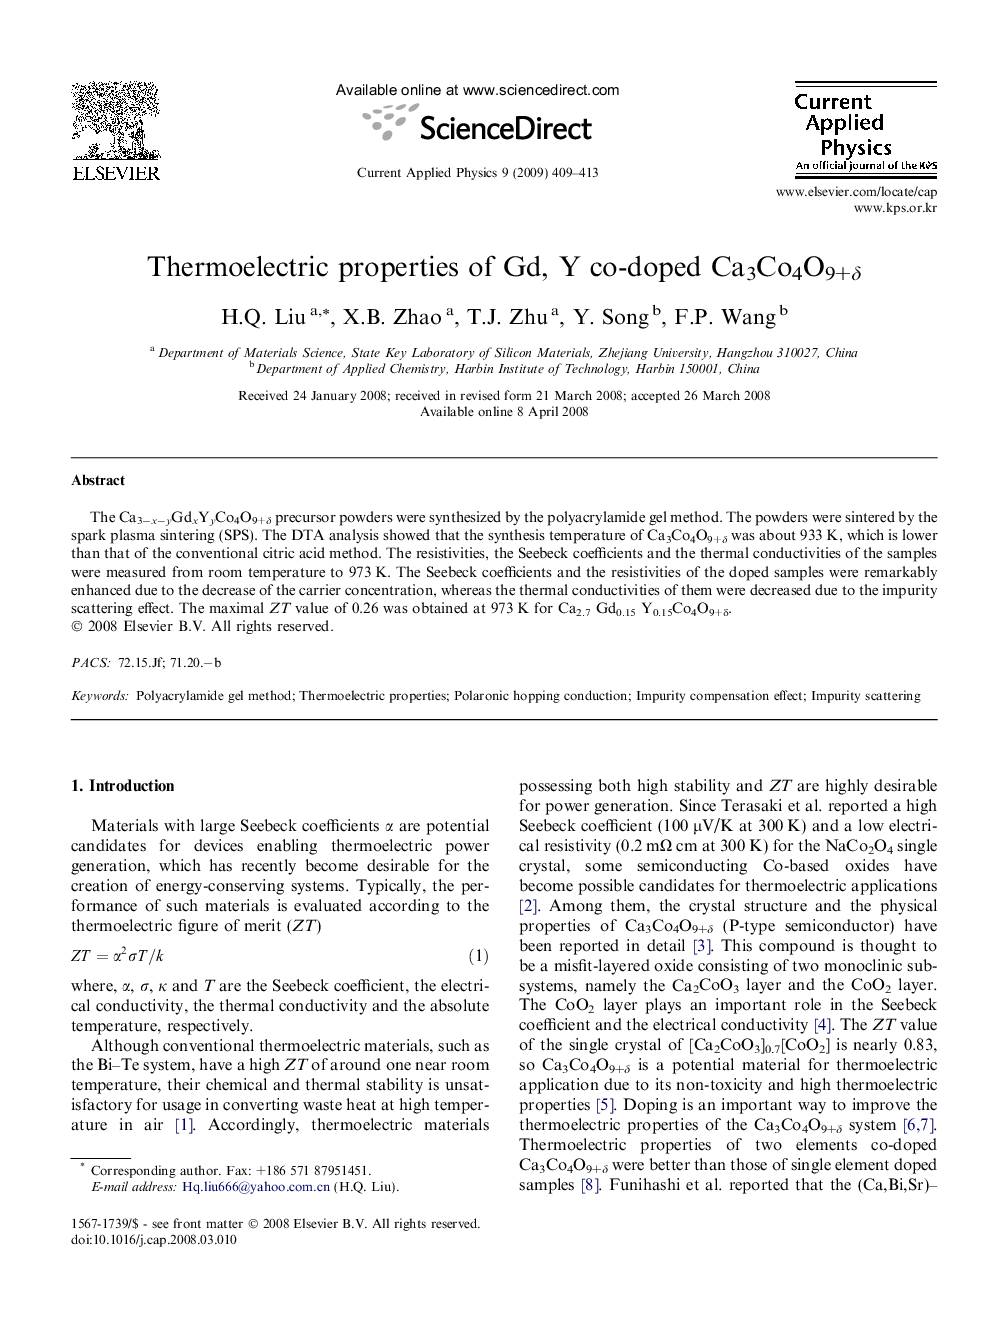 Thermoelectric properties of Gd, Y co-doped Ca3Co4O9+Î´